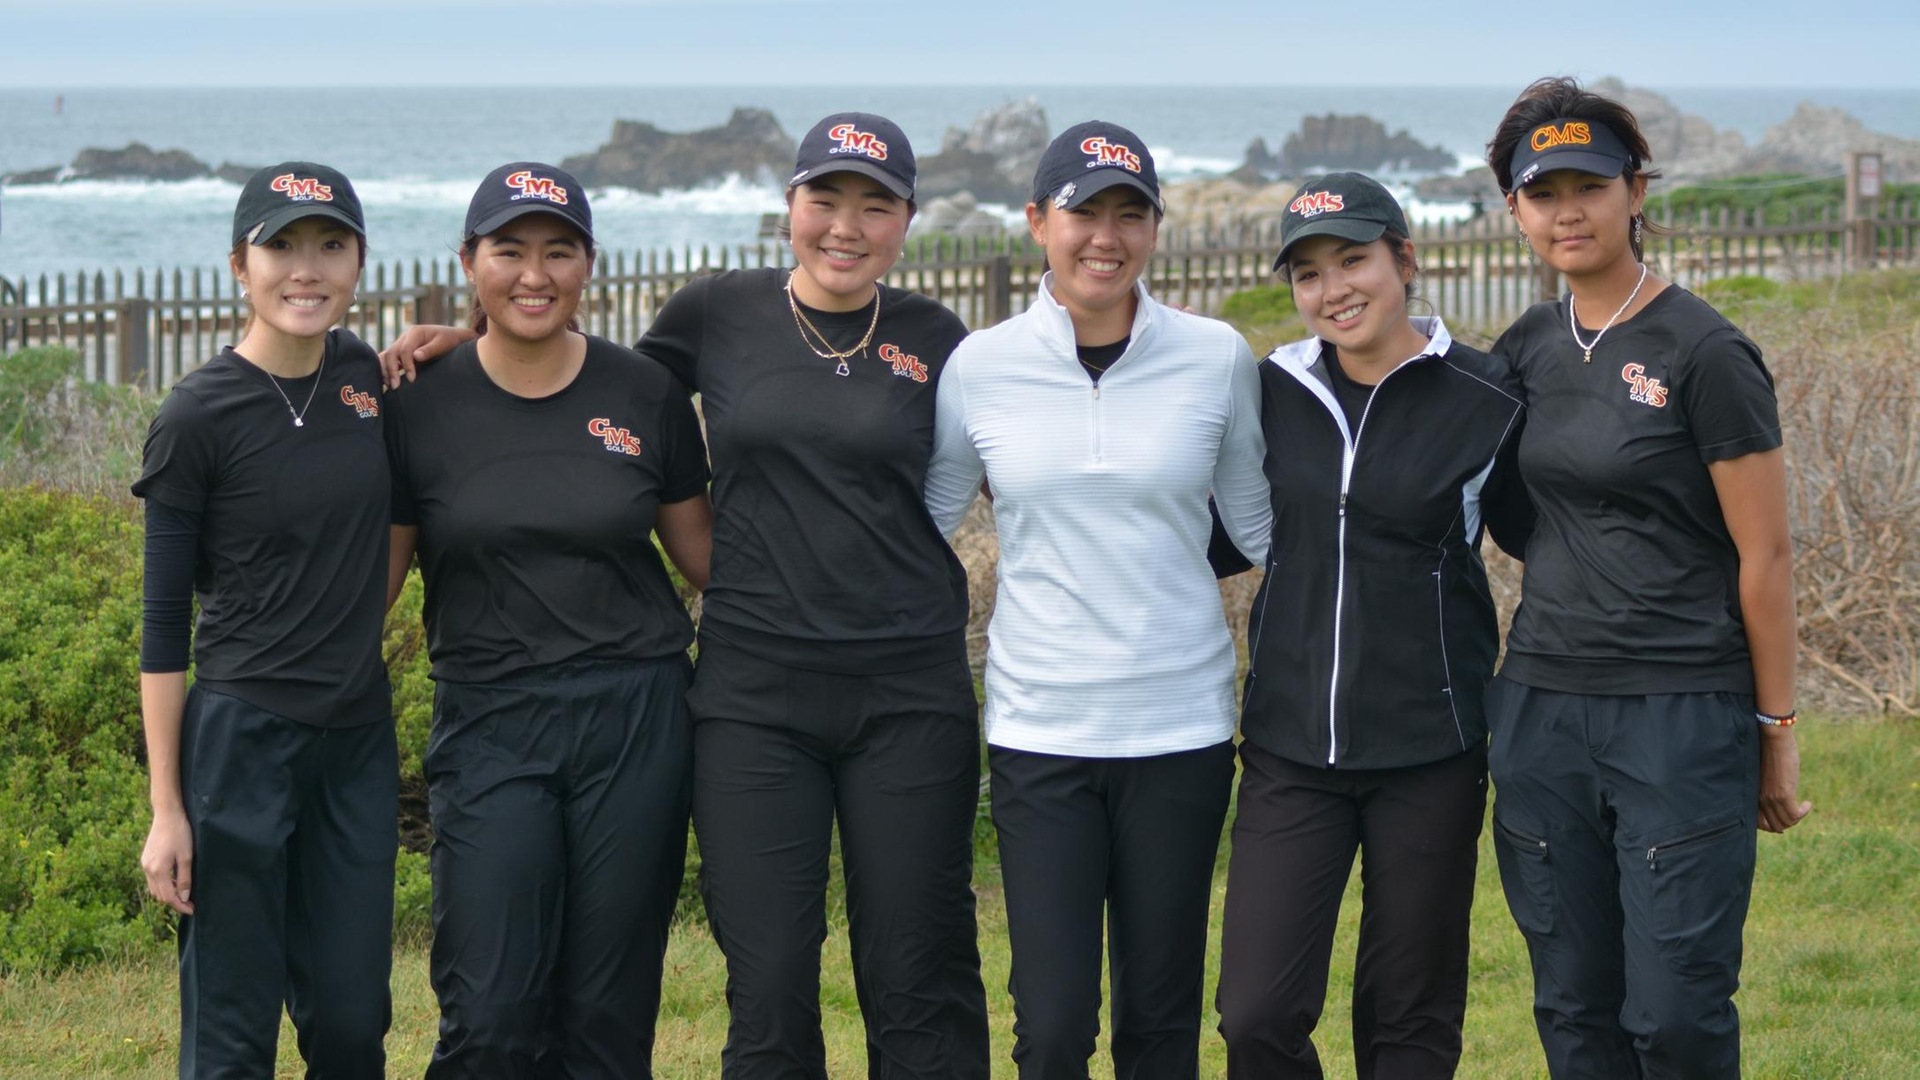 CMS women's golf will look for another top-10 finish at nationals